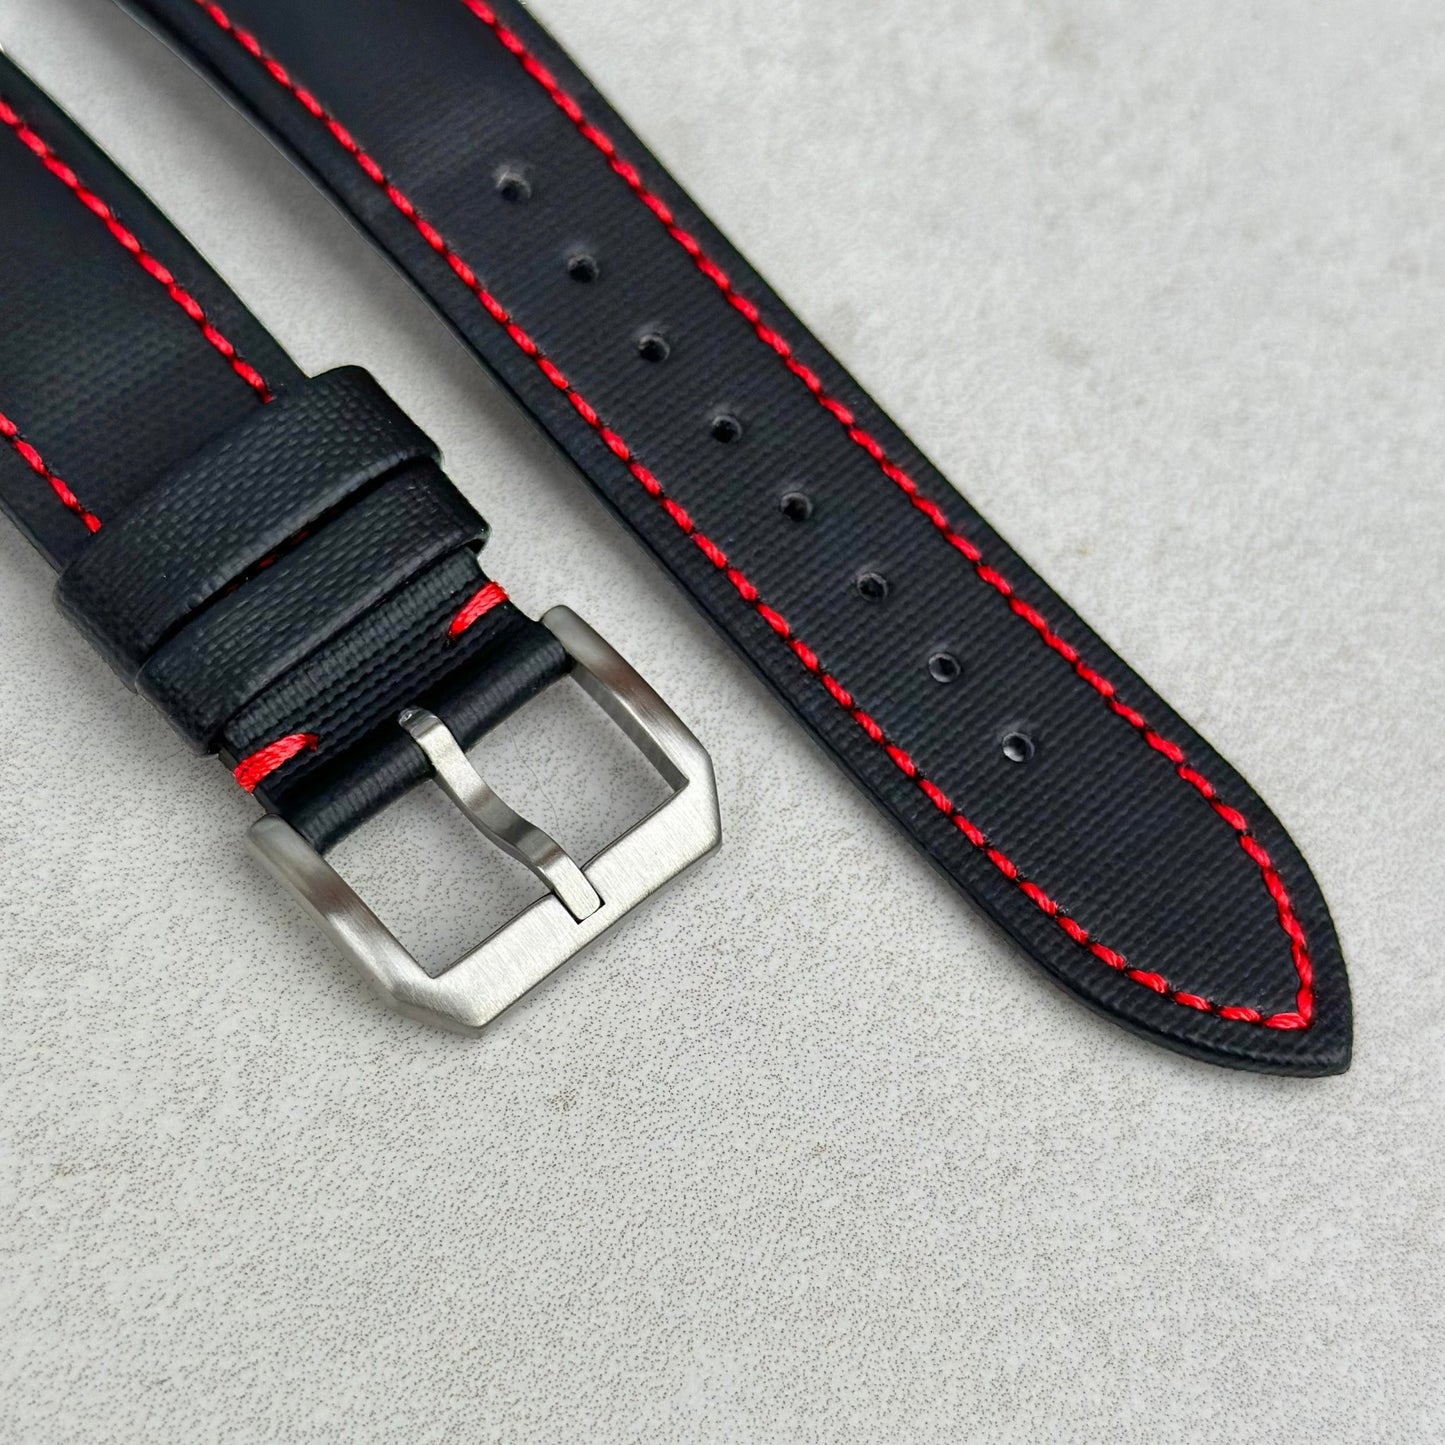 Brushed 316L stainless steel buckle on the Bermuda jet black sail cloth watch strap with contrast red stitching.